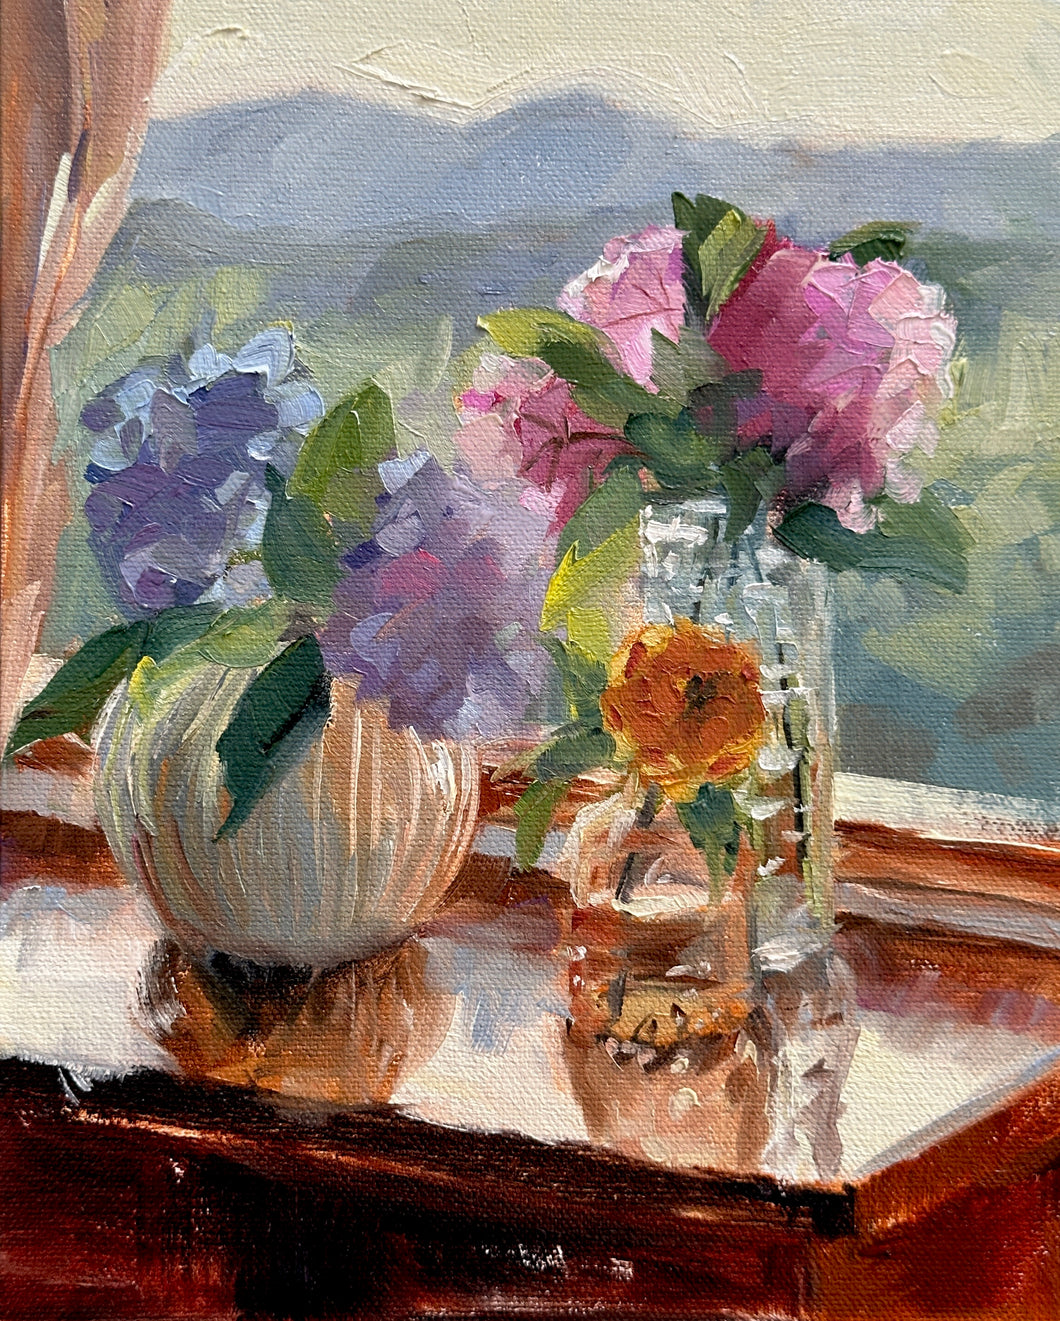 Day 24, Hydrangeas and a Mountain View